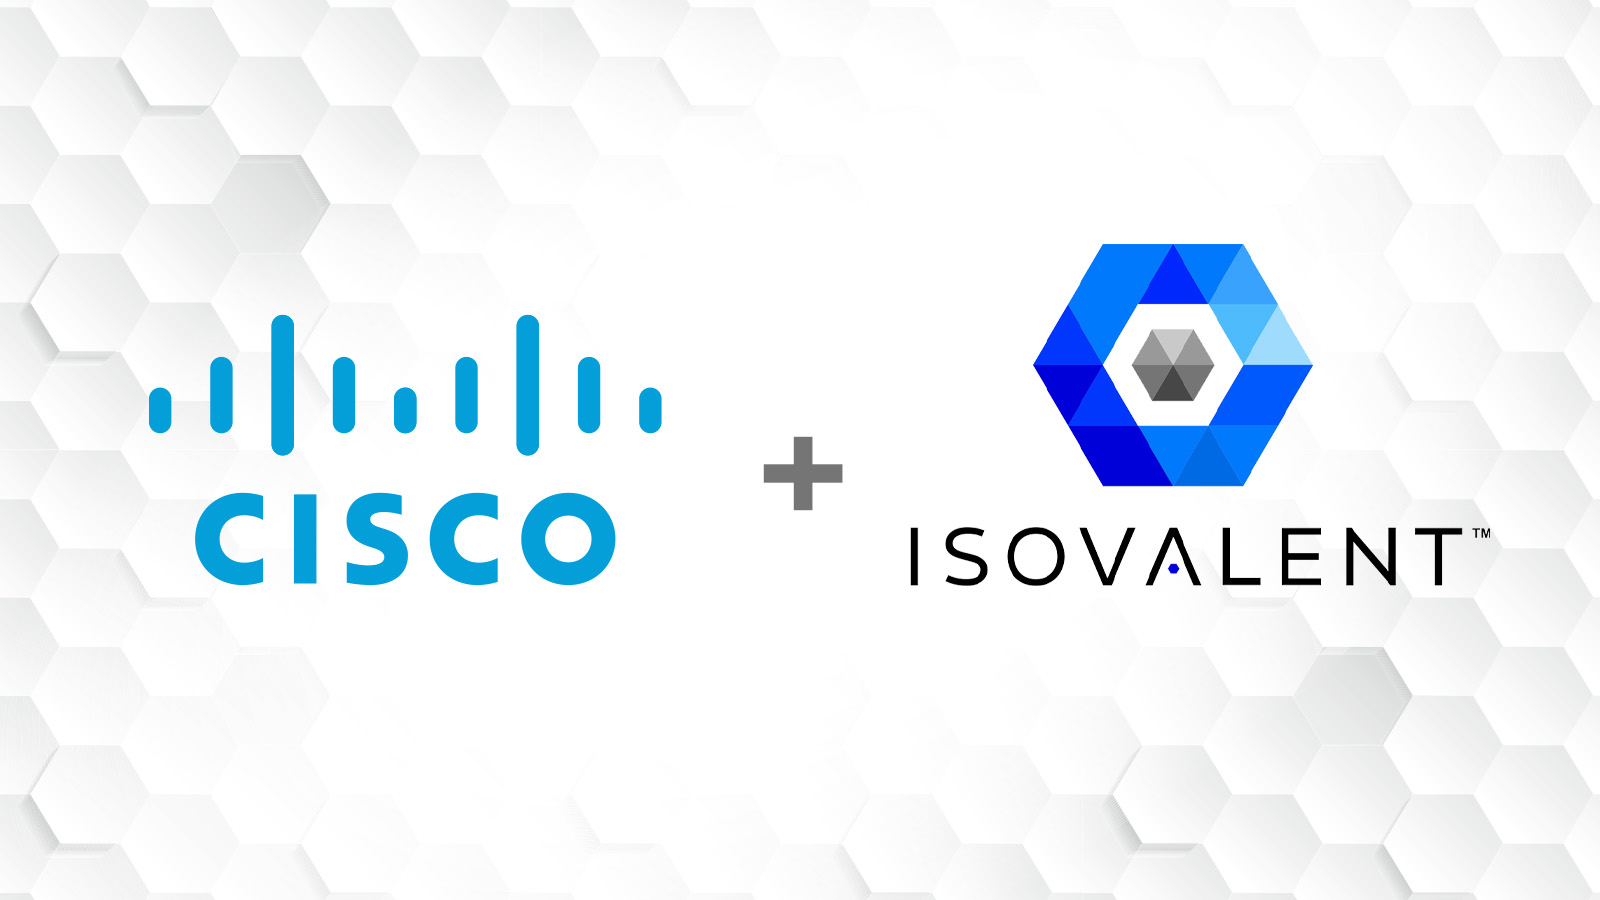 Cisco and Isovalent